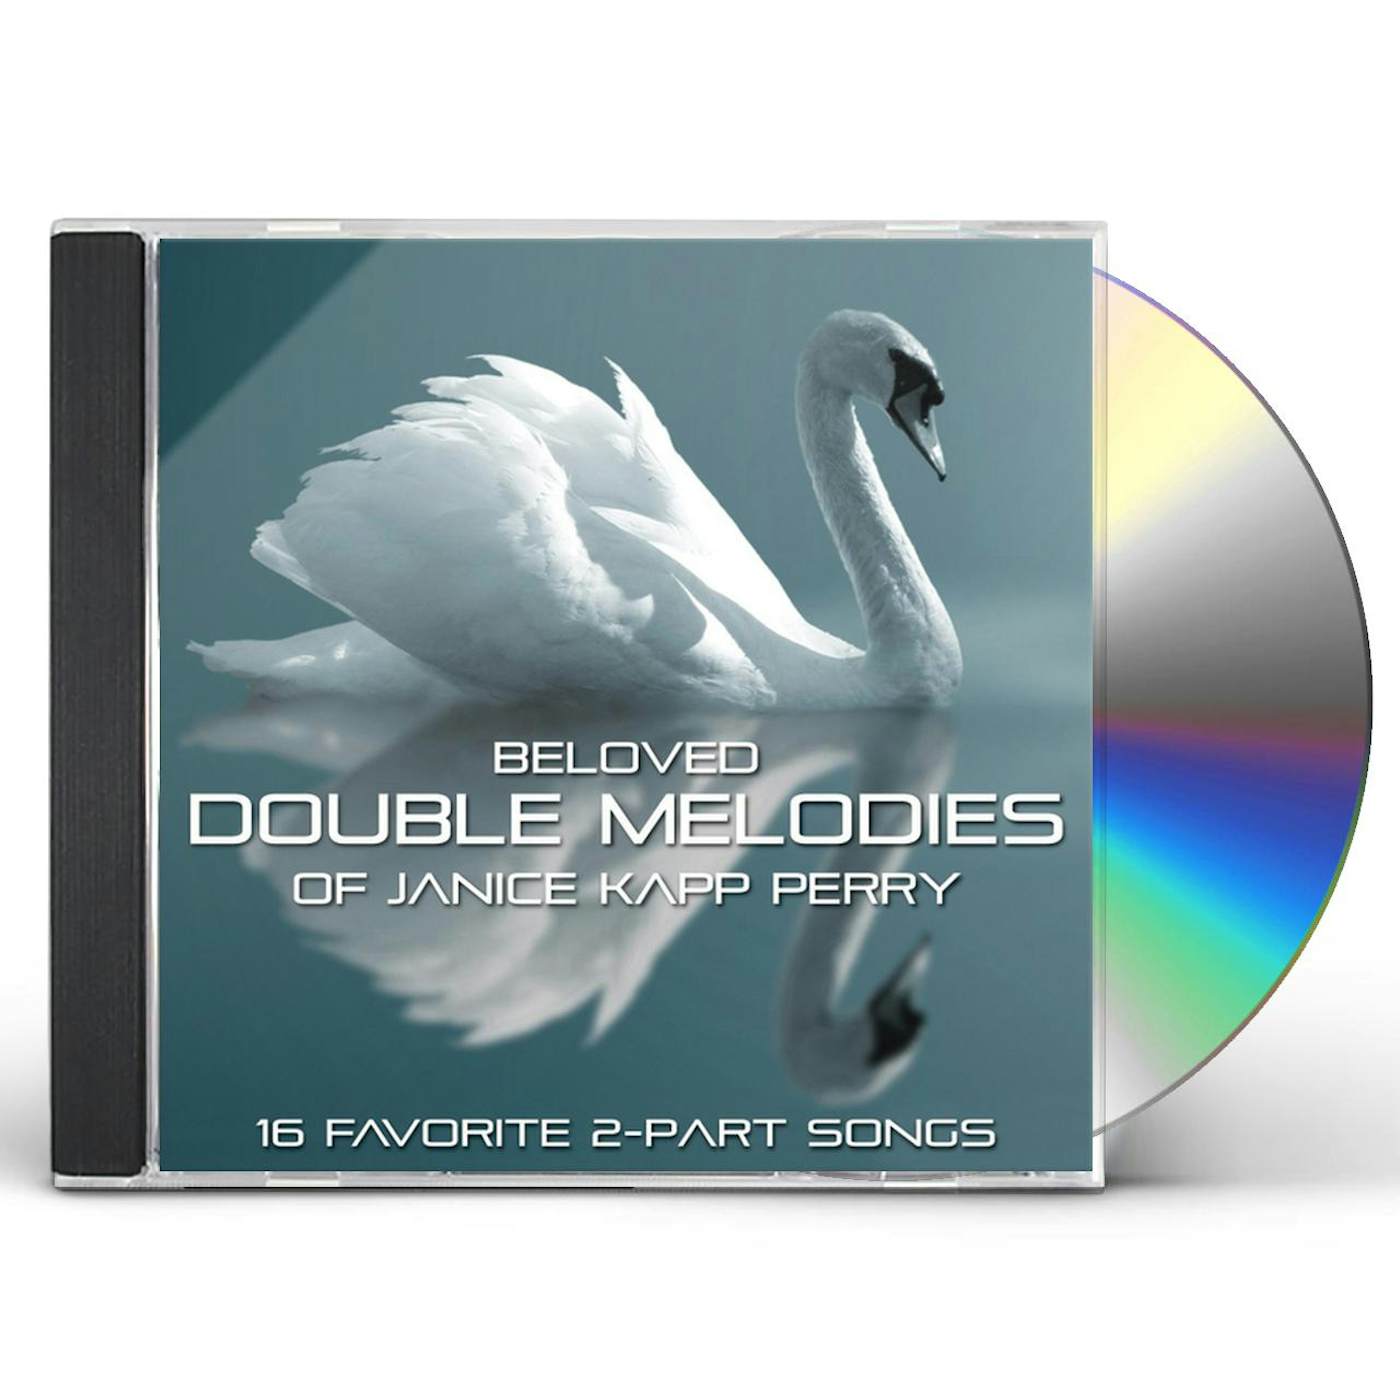 BELOVED DOUBLE MELODIES OF JANICE KAPP PERRY CD